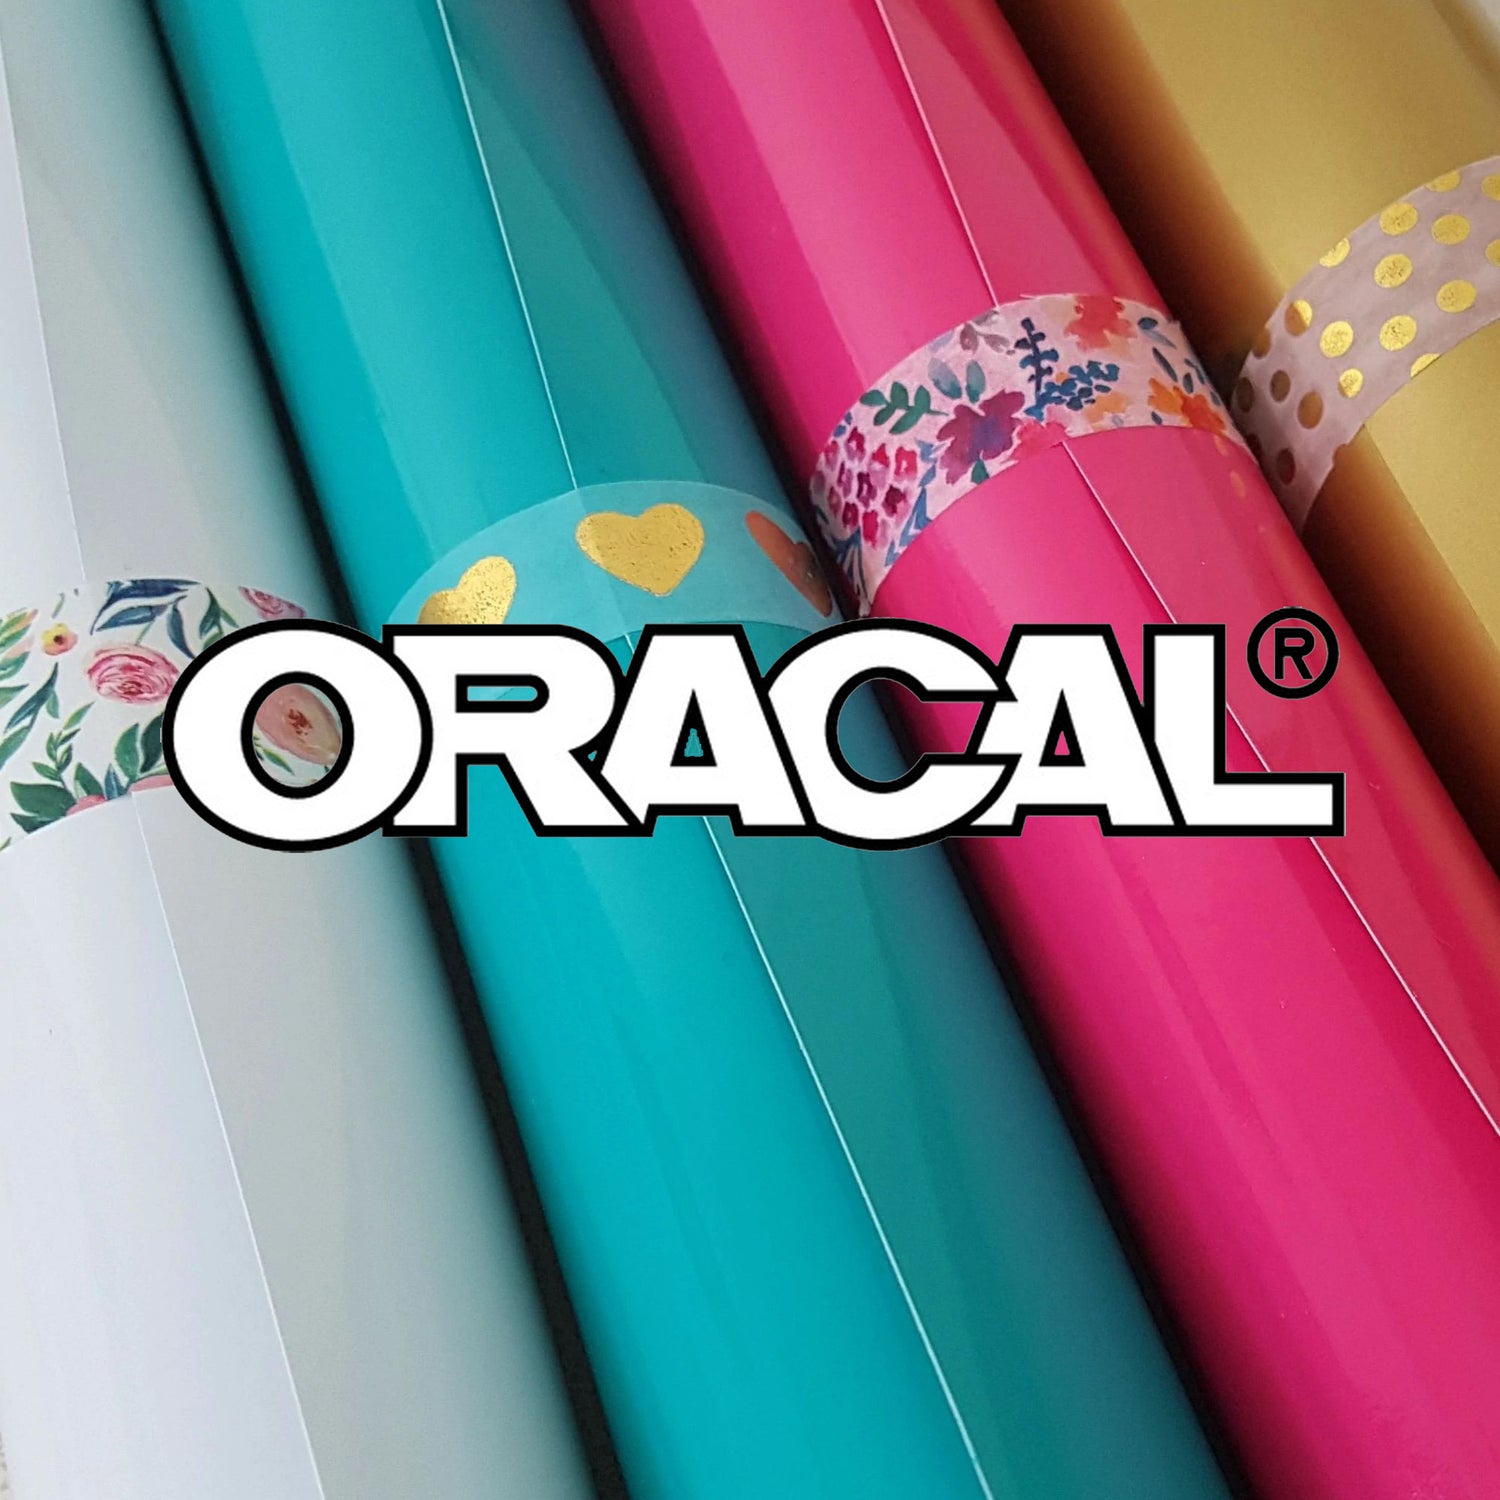 Oracal 651. Quality, permanant adhesive sticker vinyl, for use on hard surfaces.